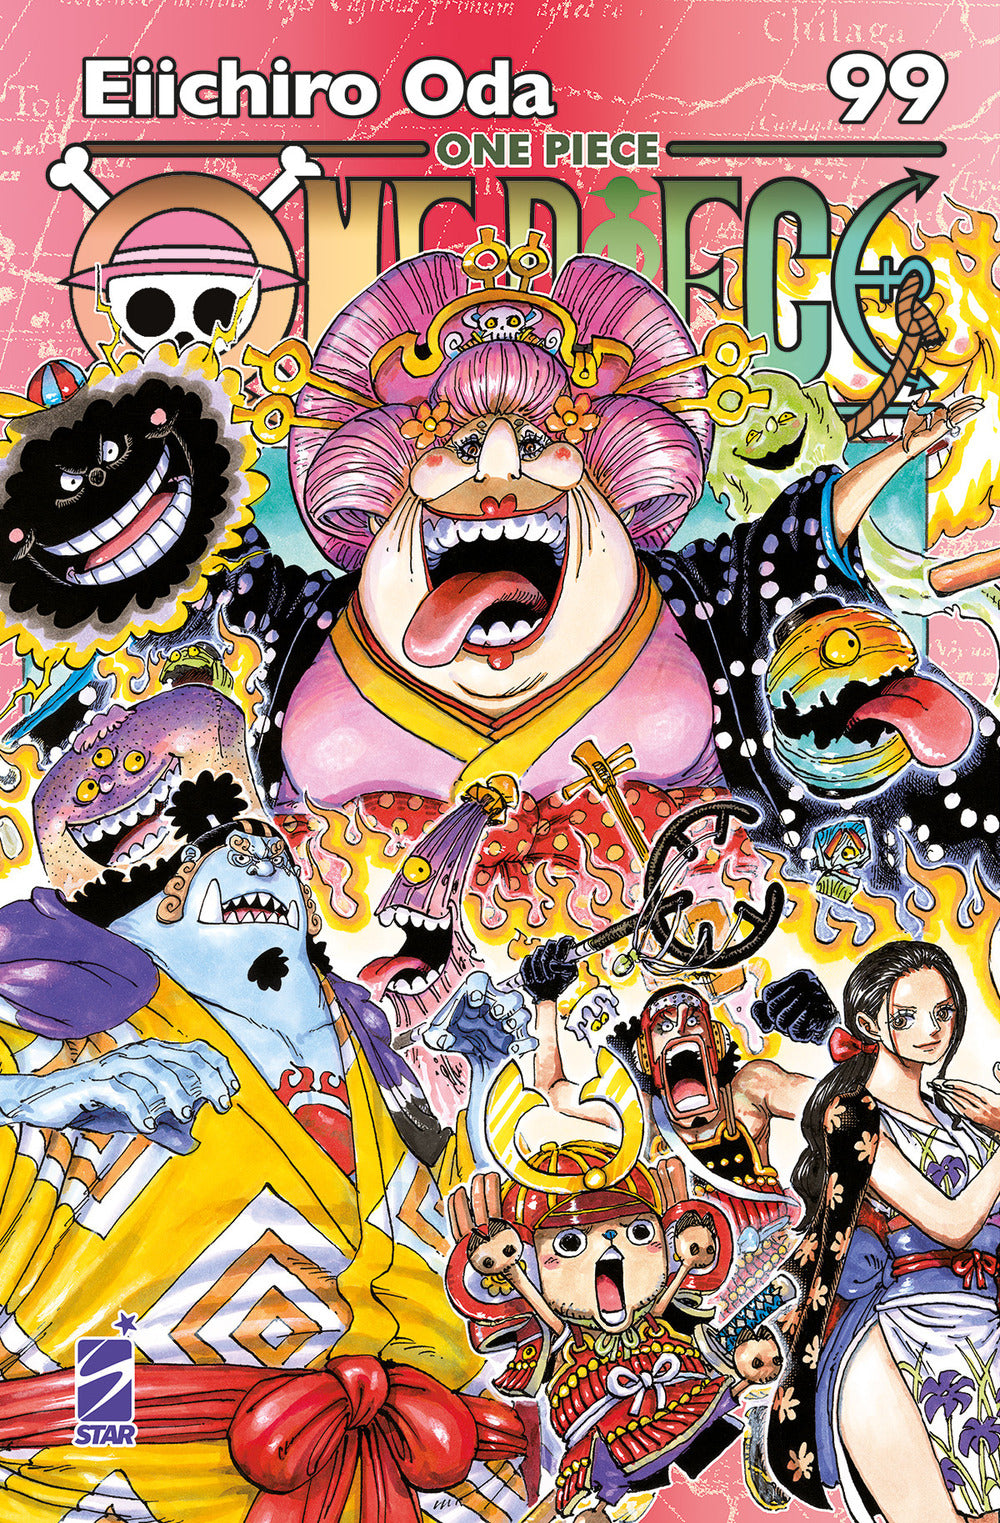 One piece. New edition. Vol. 99